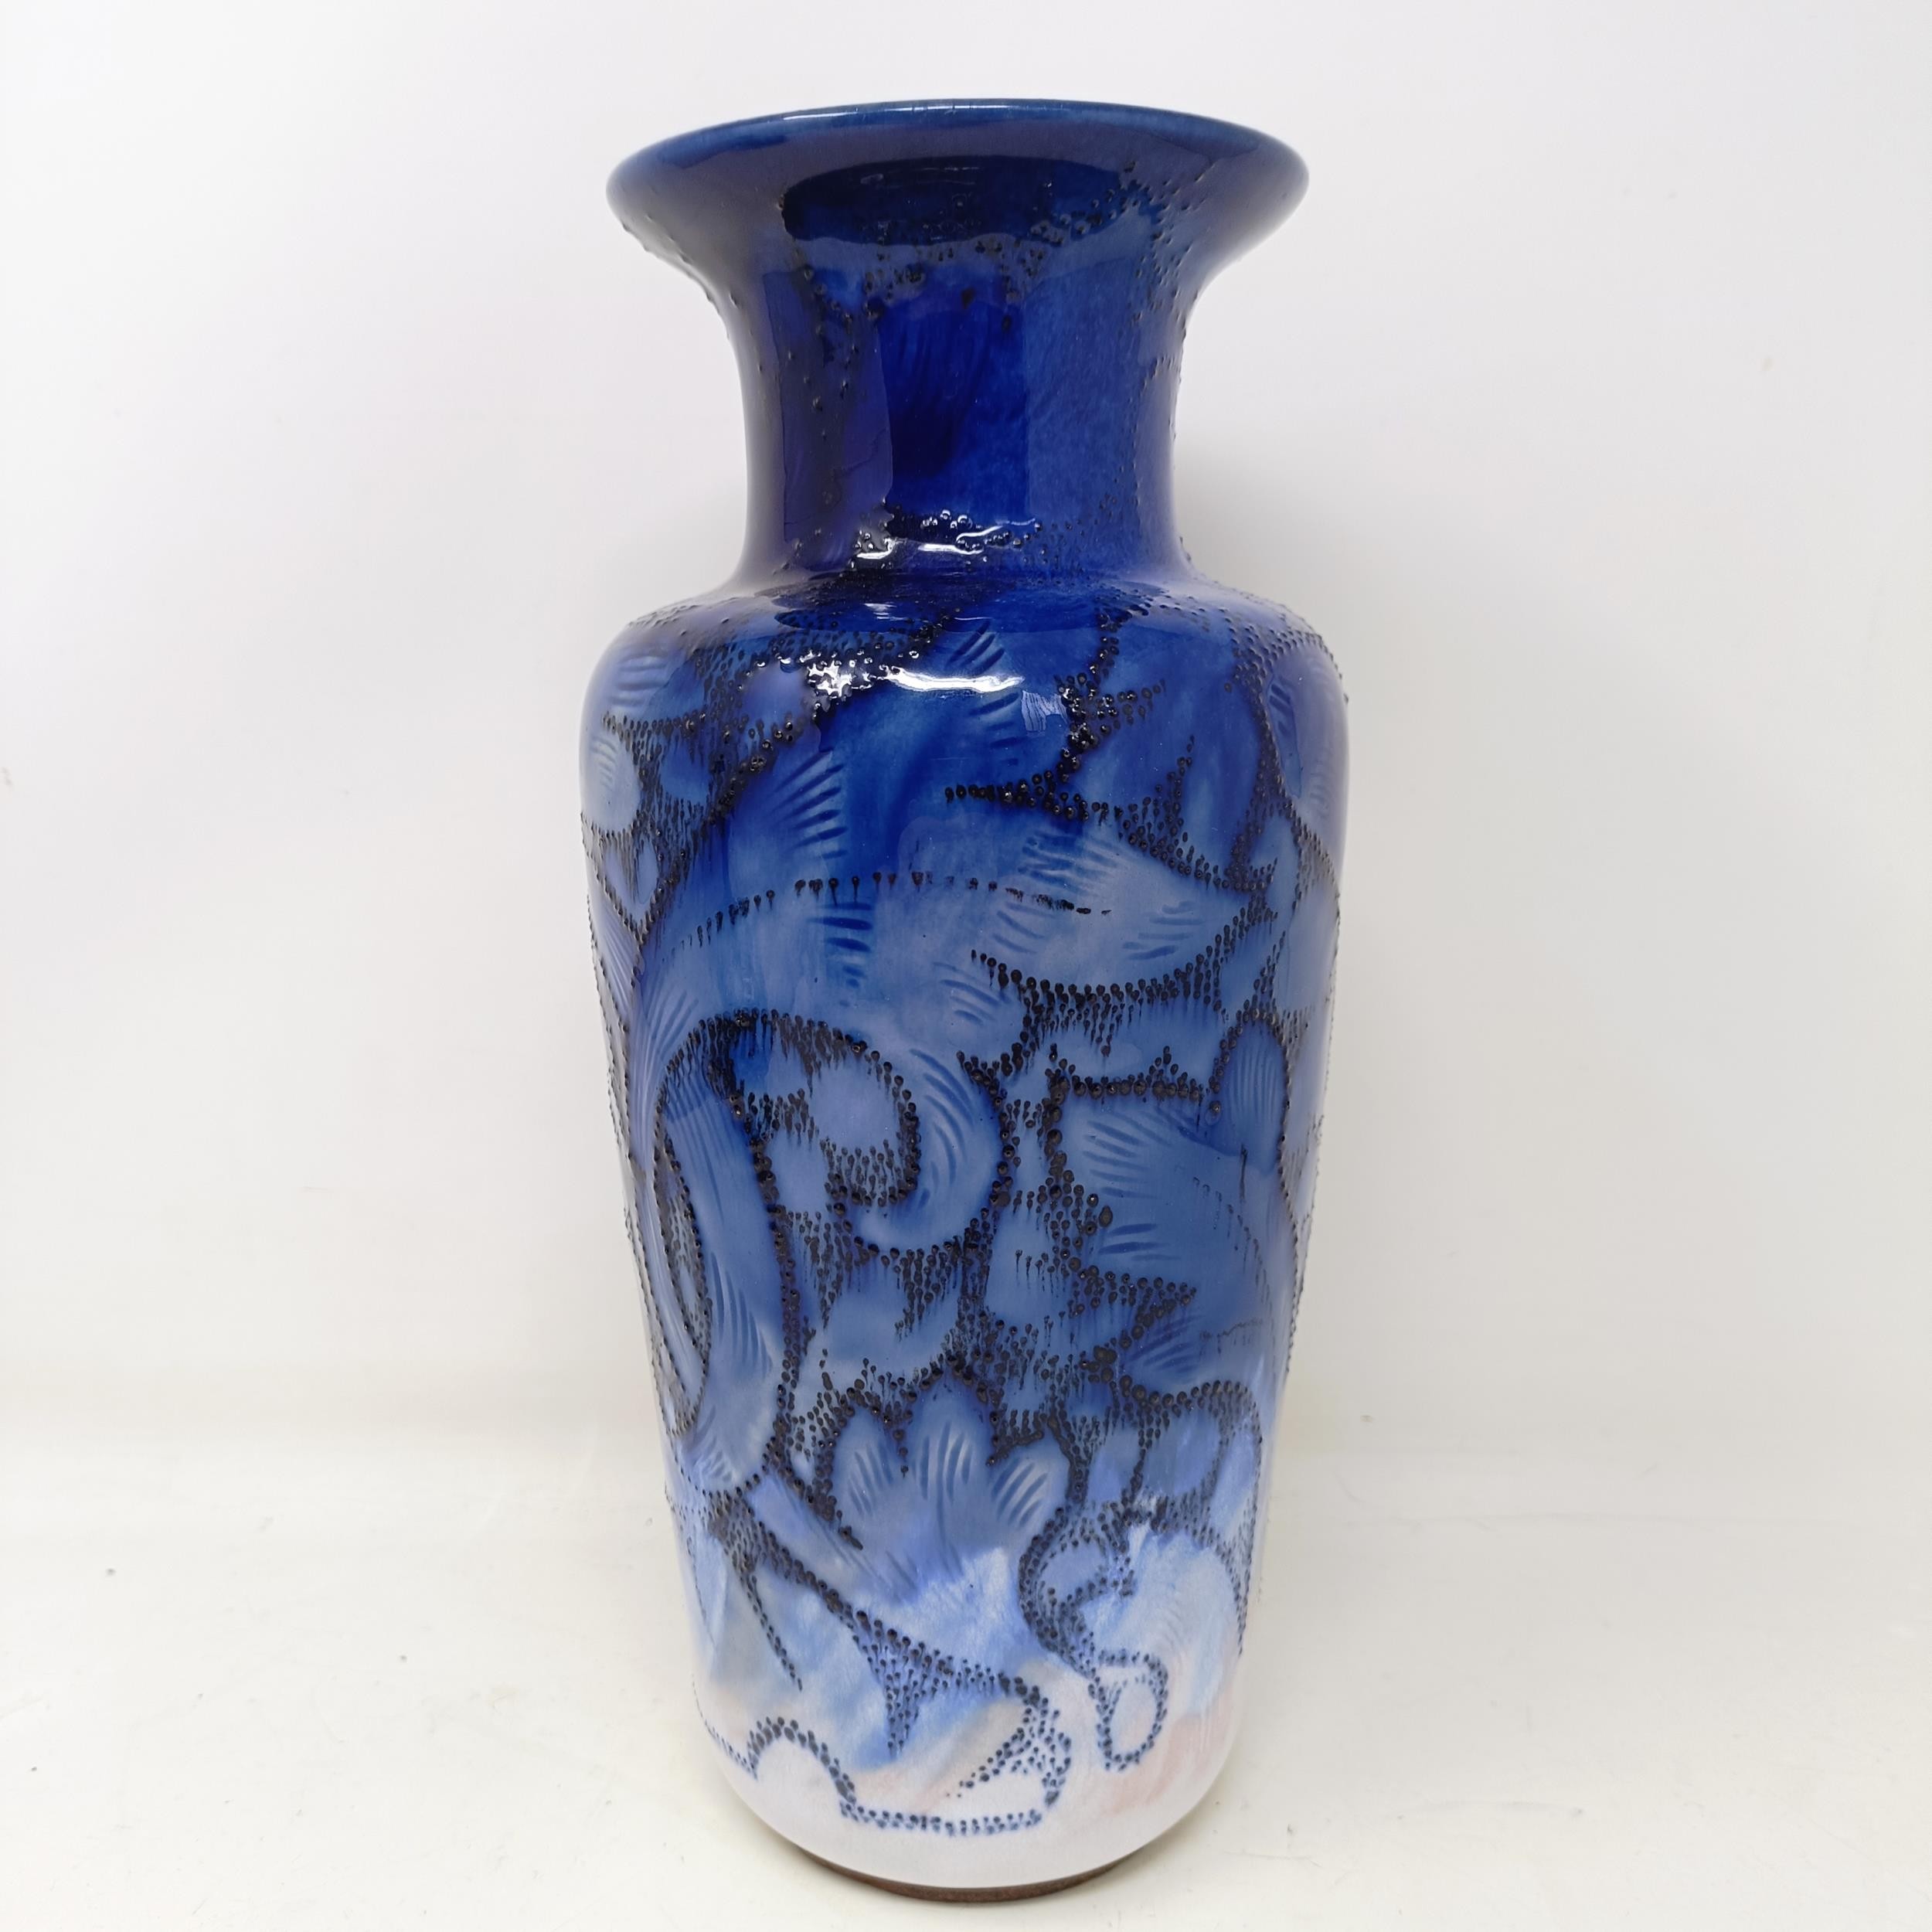 A Doulton Lambeth vase, by Mark B Marshall and Bessie Newberry, 29 cm high No chips, cracks or